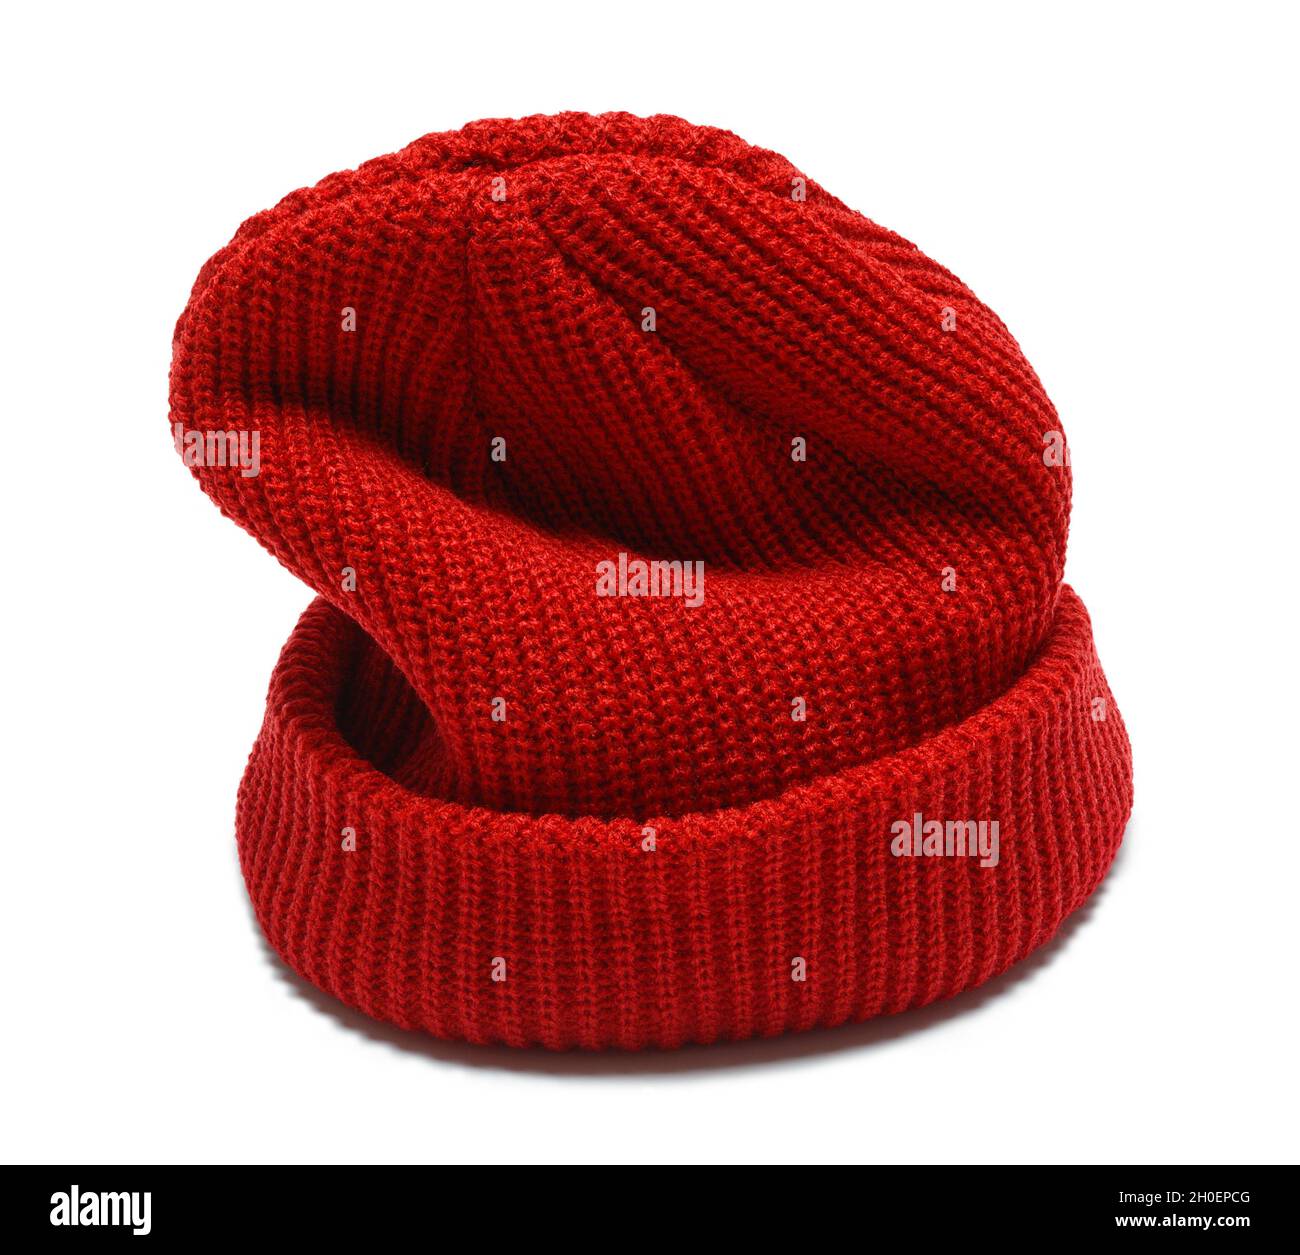 Red Knitted Stocking Hat Cut Out On White. Stock Photo